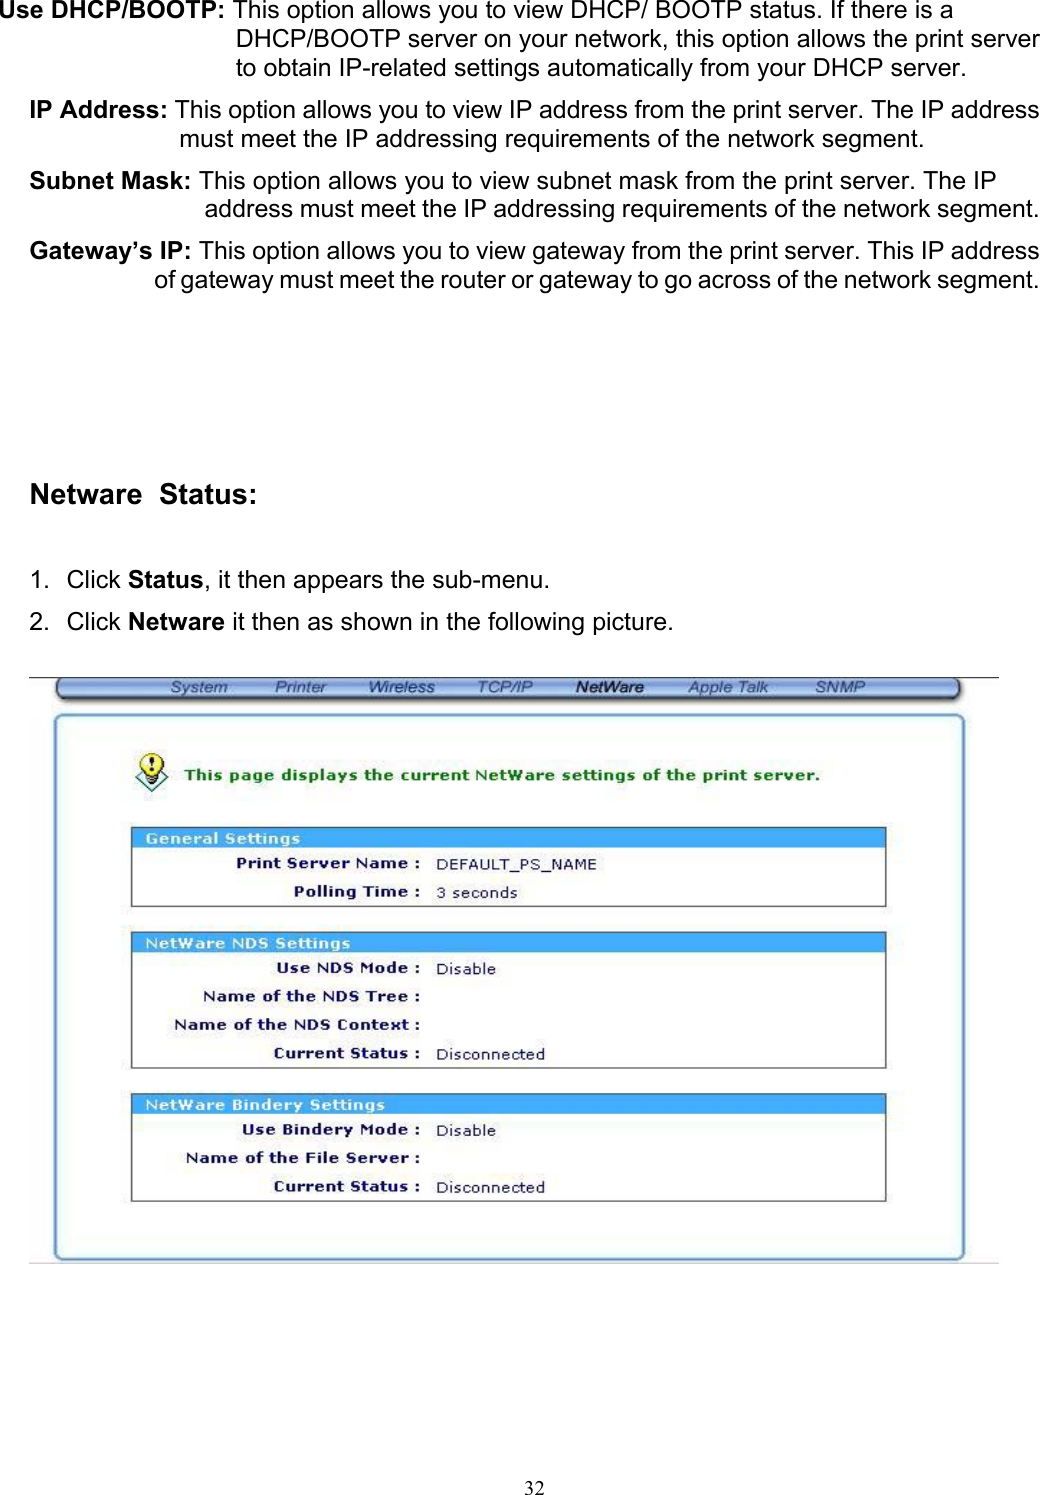   32 Use DHCP/BOOTP: This option allows you to view DHCP/ BOOTP status. If there is a DHCP/BOOTP server on your network, this option allows the print server to obtain IP-related settings automatically from your DHCP server. IP Address: This option allows you to view IP address from the print server. The IP address must meet the IP addressing requirements of the network segment. Subnet Mask: This option allows you to view subnet mask from the print server. The IP address must meet the IP addressing requirements of the network segment. Gateway’s IP: This option allows you to view gateway from the print server. This IP address of gateway must meet the router or gateway to go across of the network segment.        Netware  Status:  1. Click Status, it then appears the sub-menu. 2. Click Netware it then as shown in the following picture.       